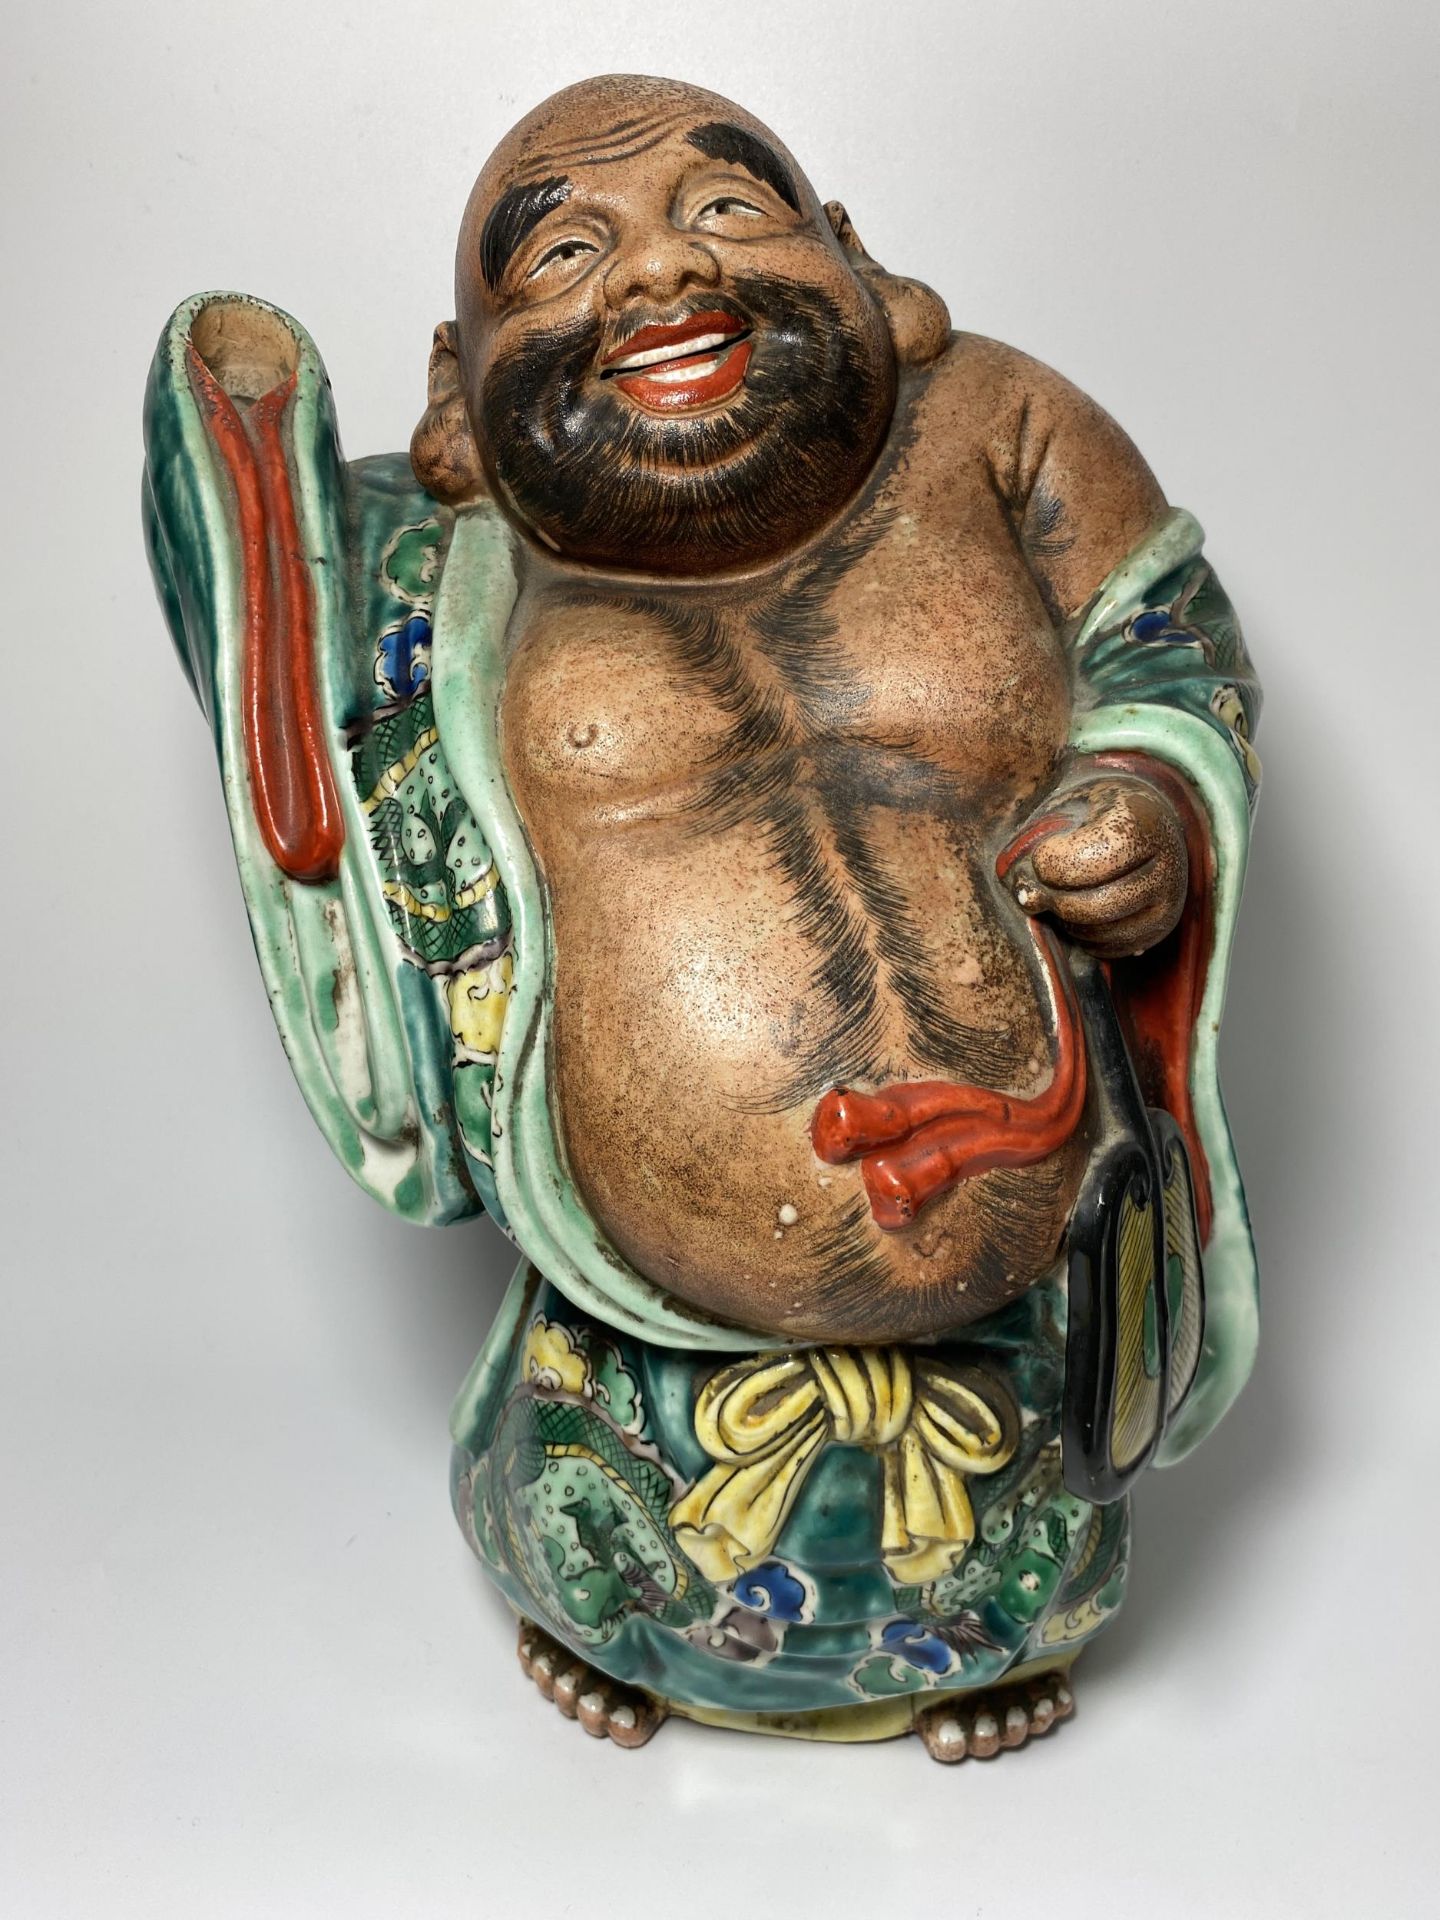 A LARGE JAPANESE MEIJI PERIOD (1868-1912) POTTERY MODEL OF HOTEI WEARING CHINESE DRAGON DESIGN ROBE,